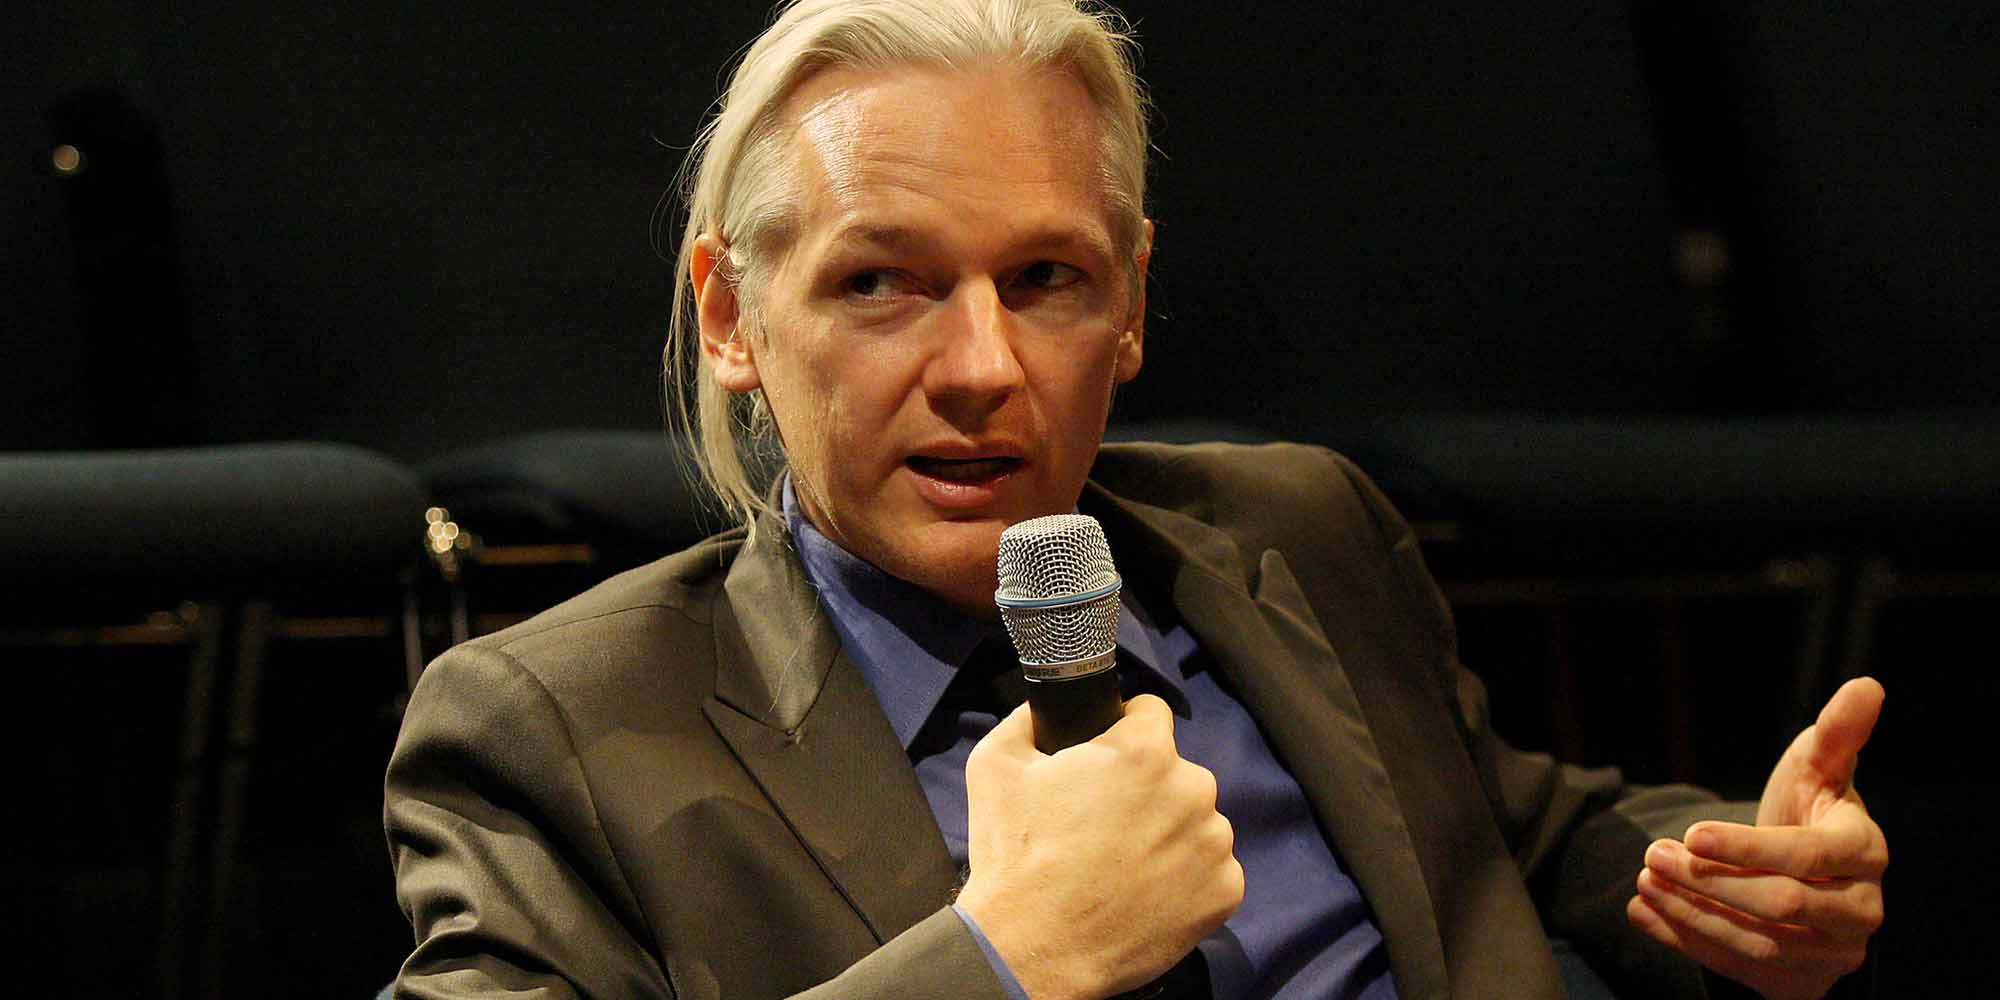 <strong>2009:</strong> Julian Assange receives an Award of Distinction in the "Digital Communities" category of the Prix Ars Electronica for Wikileaks.